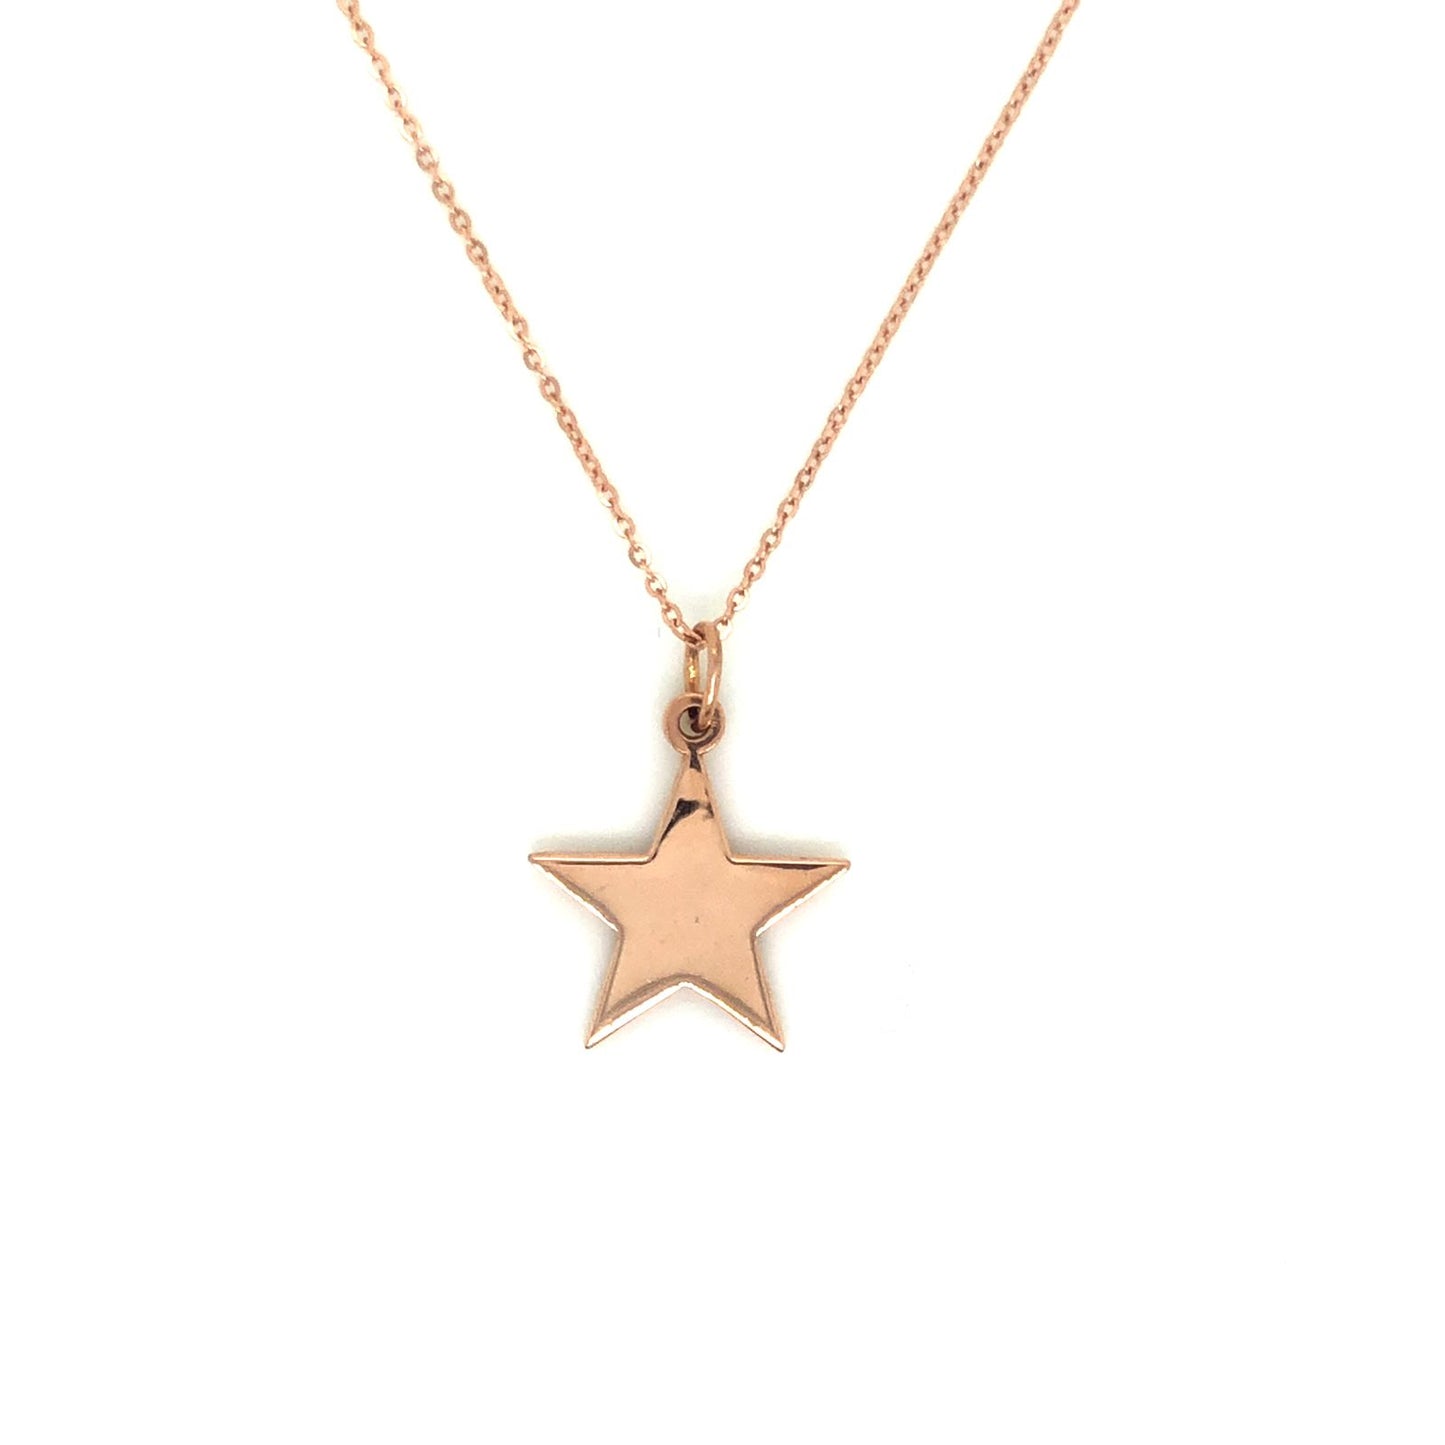 IMMEDIATE DELIVERY / Star Pendant Necklace / 14k Rose Gold